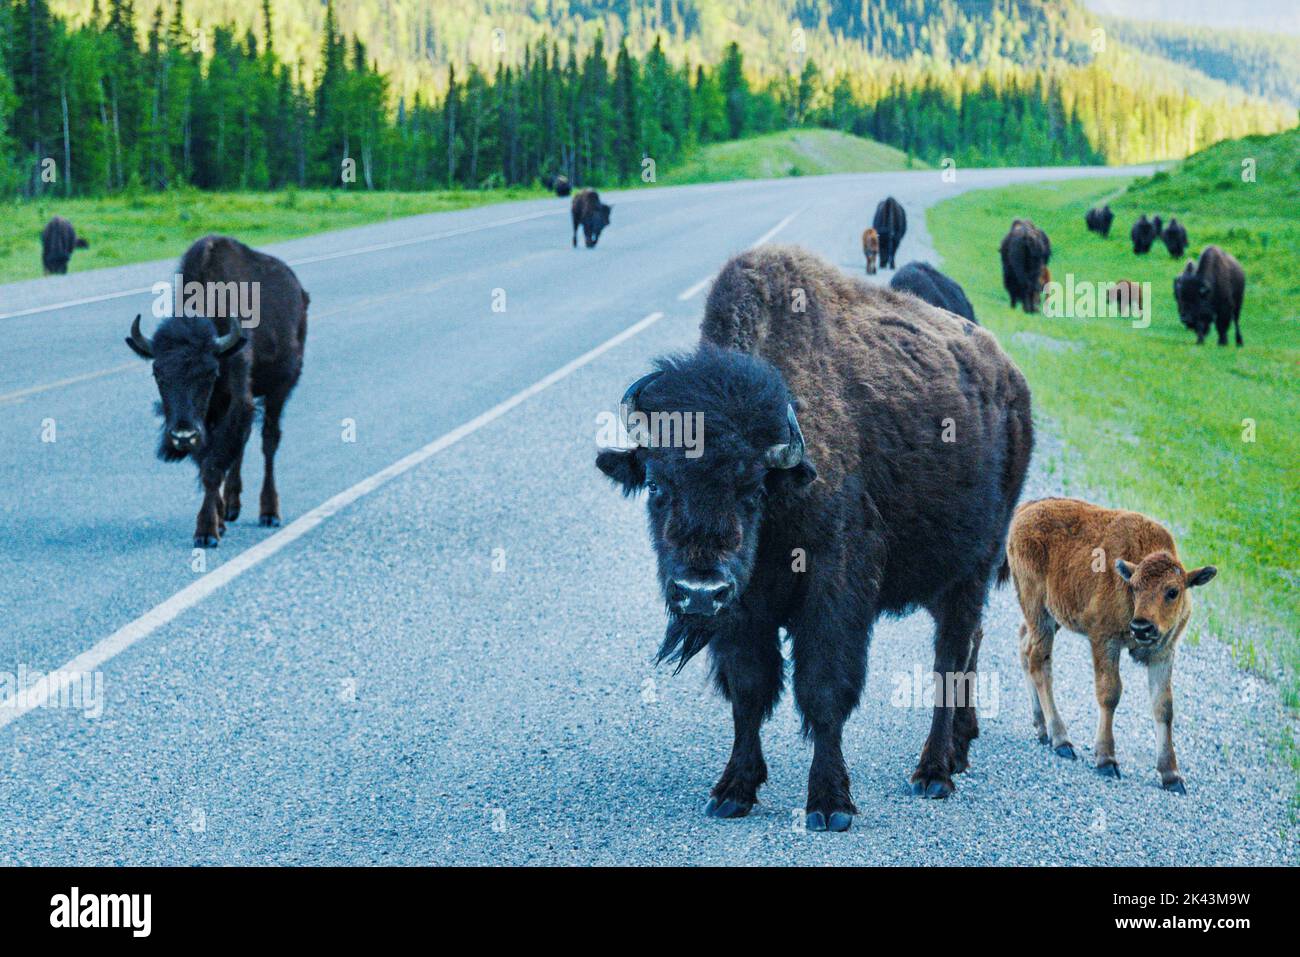 Female cow Wood Bison with young calf; Alaska Highway; British Columbia; Canada Stock Photo